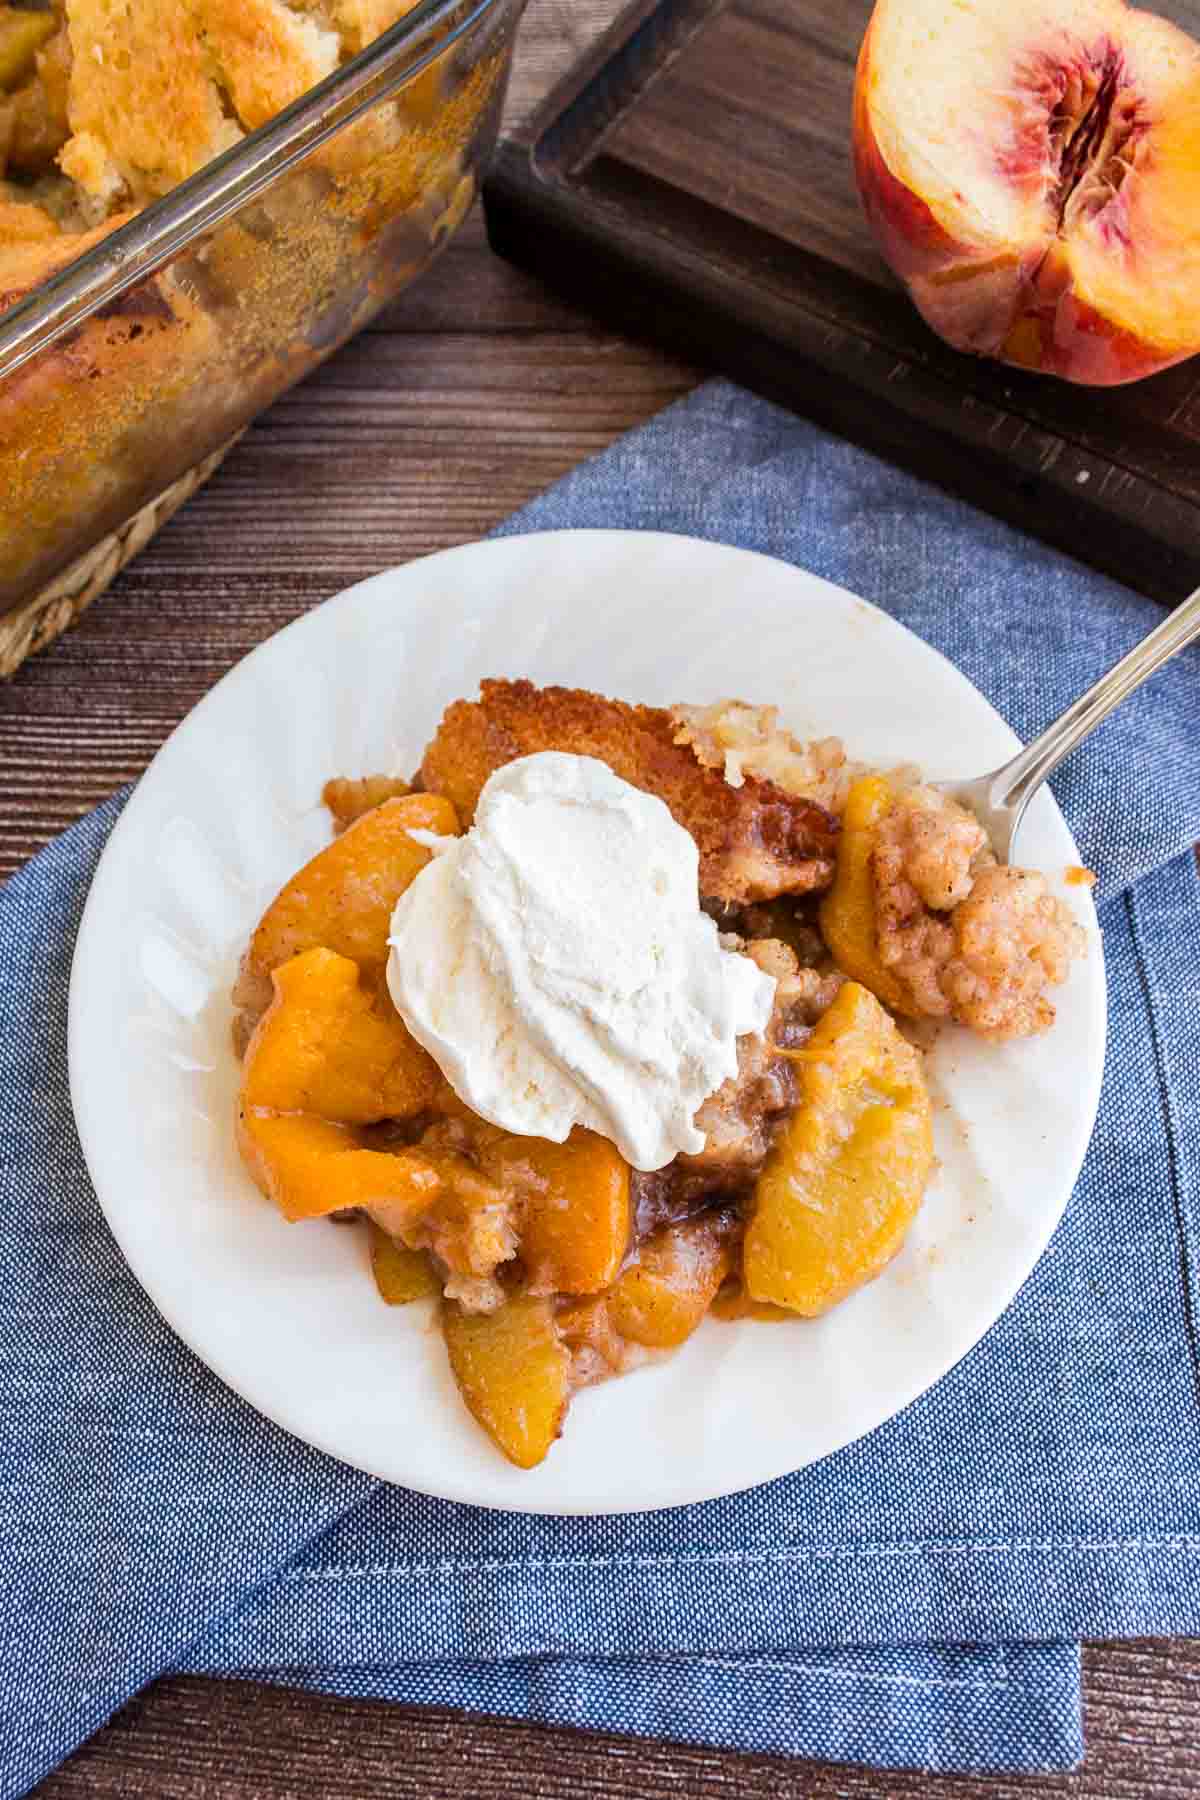 A plate of peach cobbler topped with a dollop of whipped cream sits on a blue napkin, with a partially sliced peach and a baking dish of cobbler in the background.